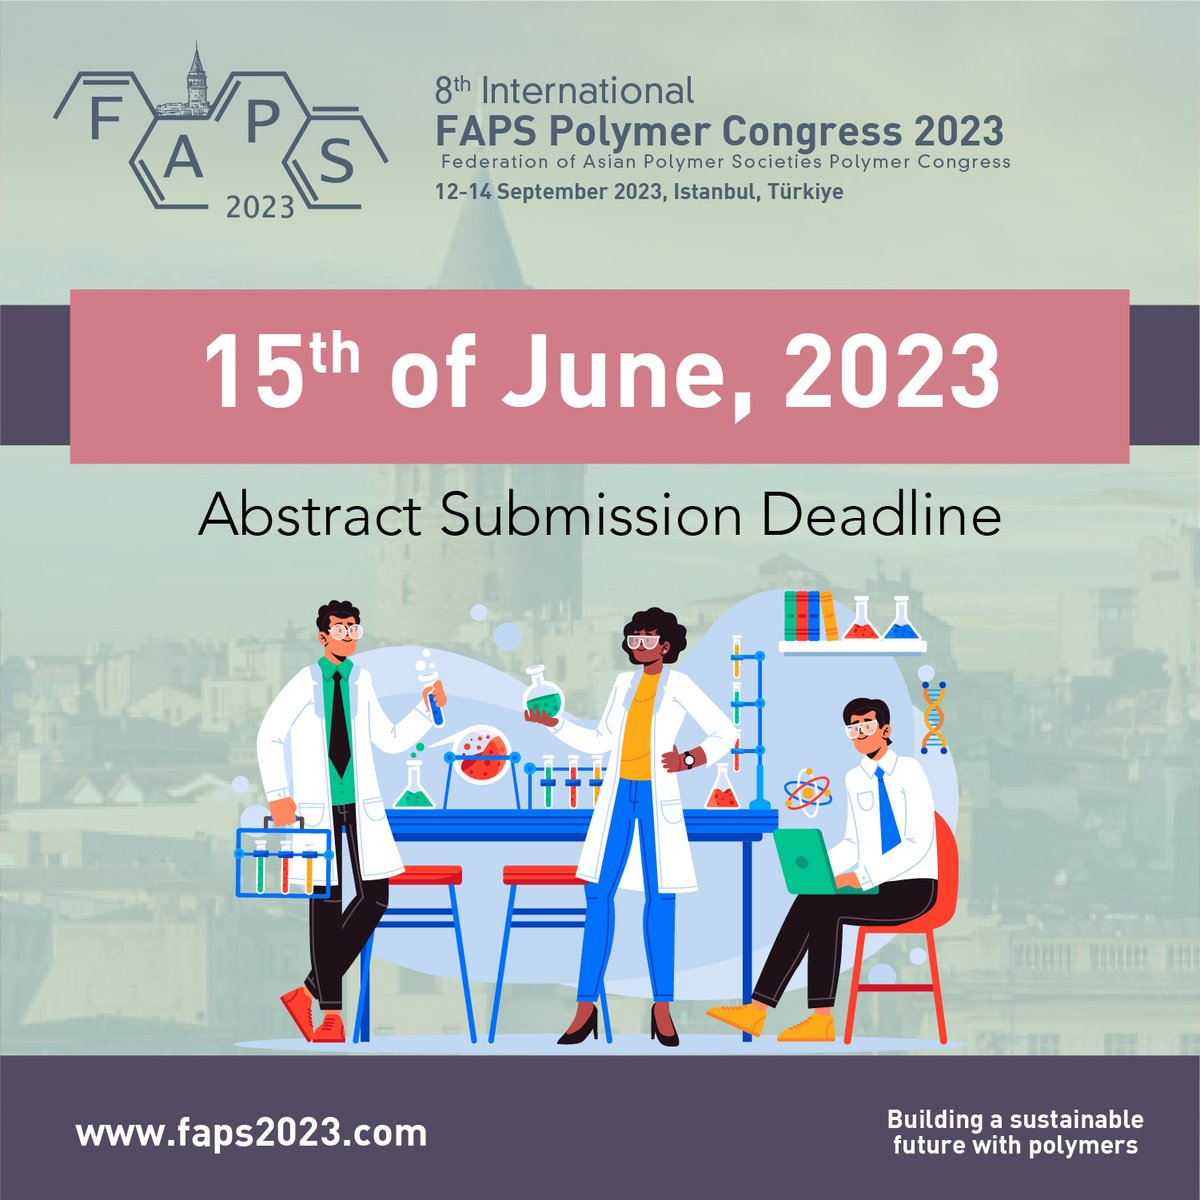 MARK YOUR CALENDAR! #FAPS2023 Abstract Submission Deadline is 15th of June! #Chemistry #chemicals #chemicalengineer #polymerchemistry #internationalcongress